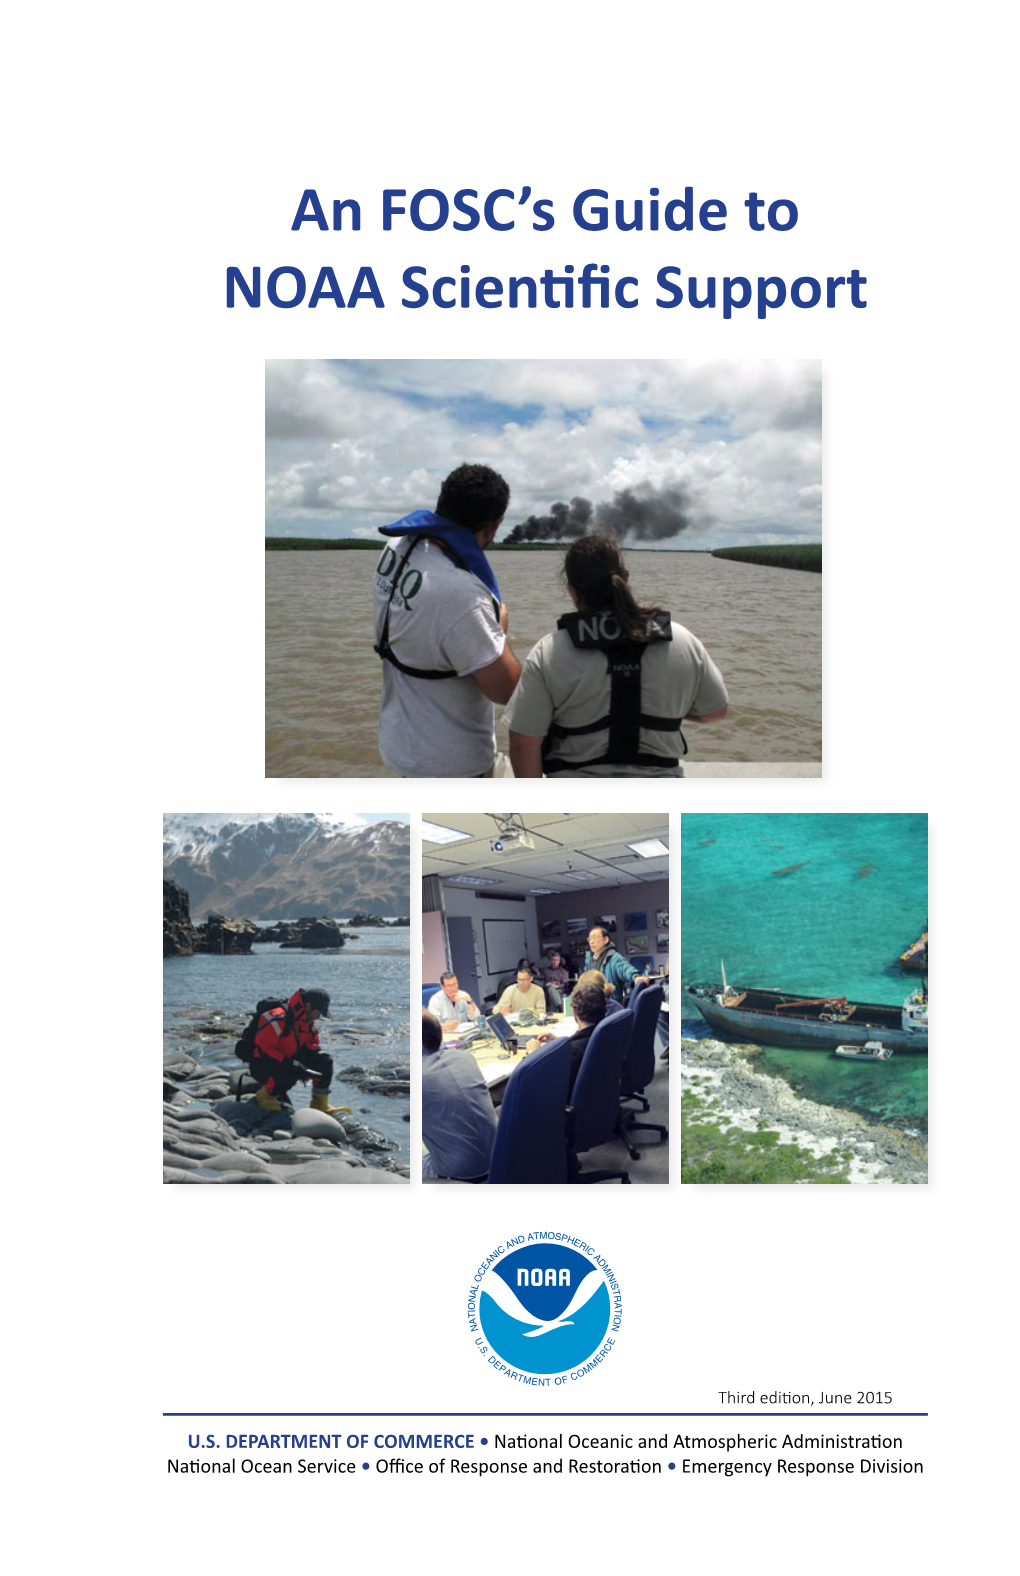 An Fosc's Guide to NOAA Scientific Support